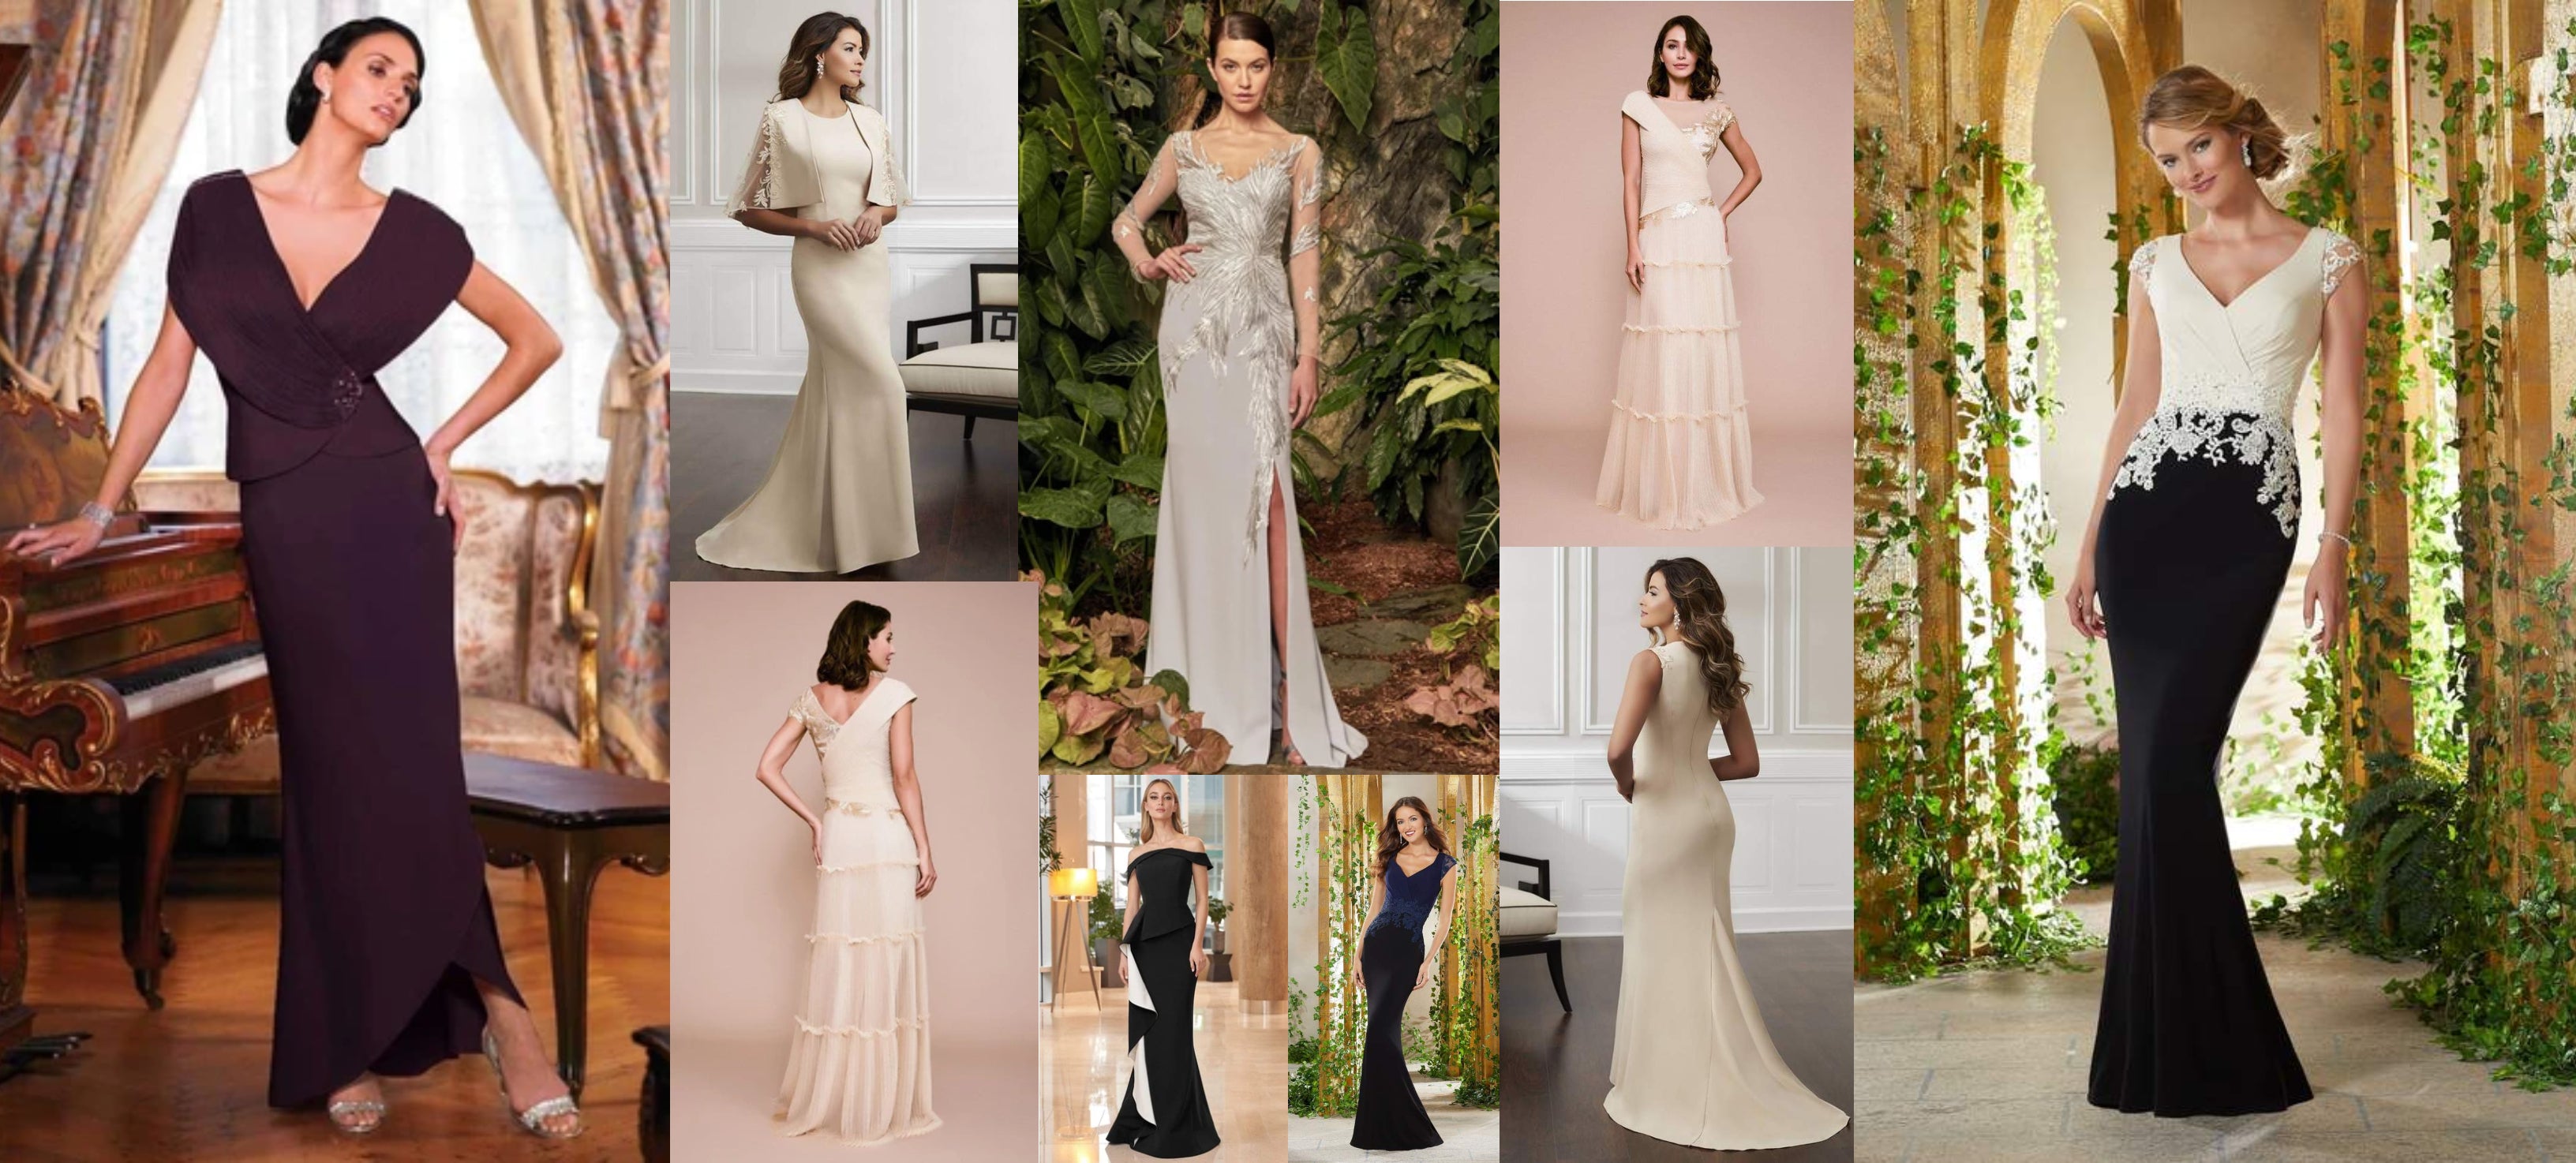 All You Need to Know About Finding the Perfect Mother of the Bride Dress